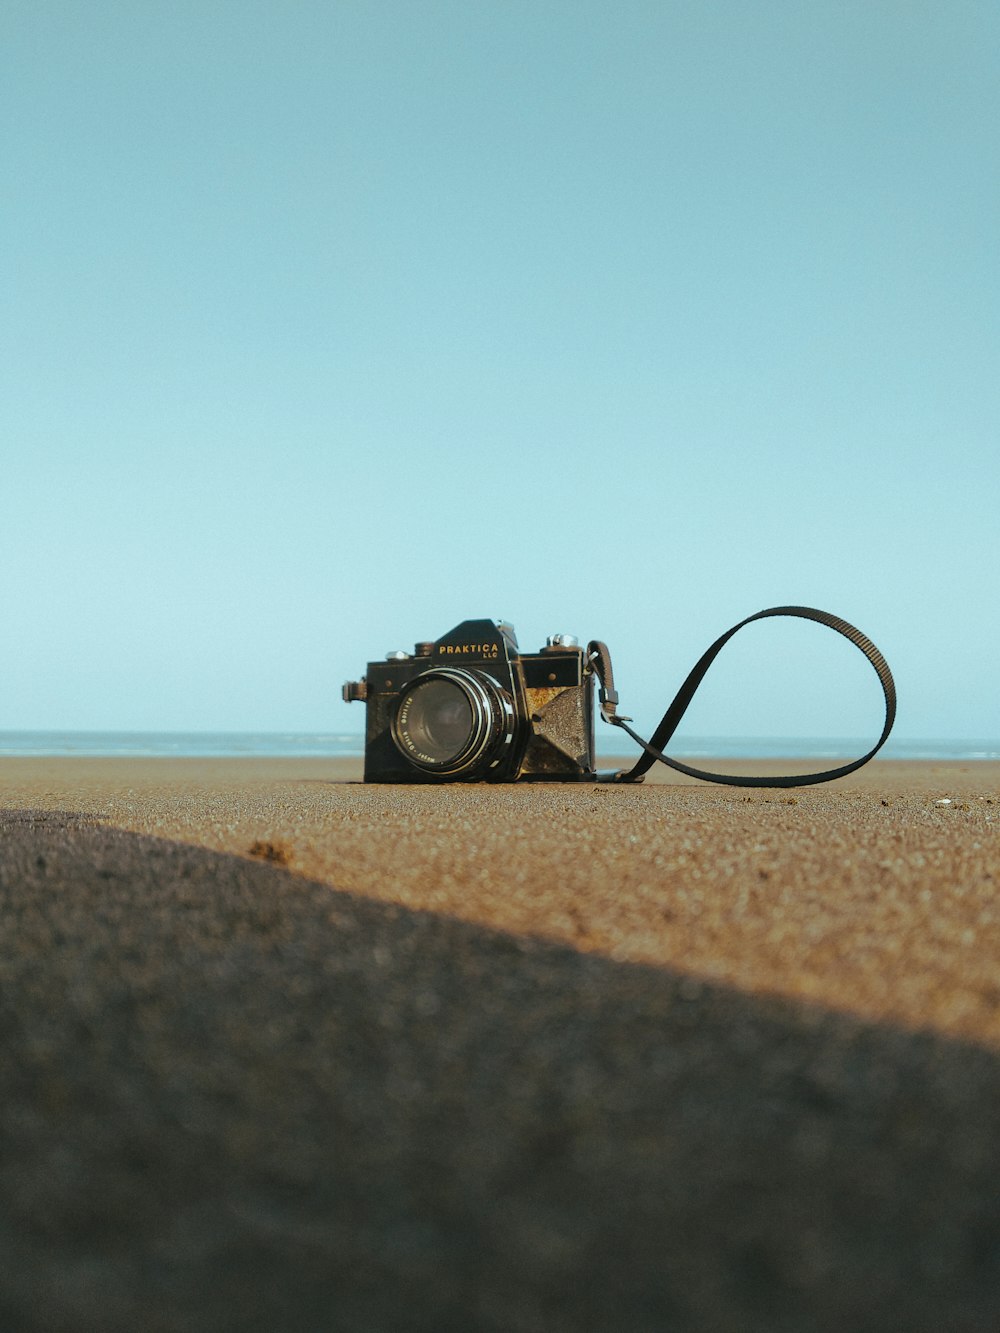 black and silver dslr camera on brown sand